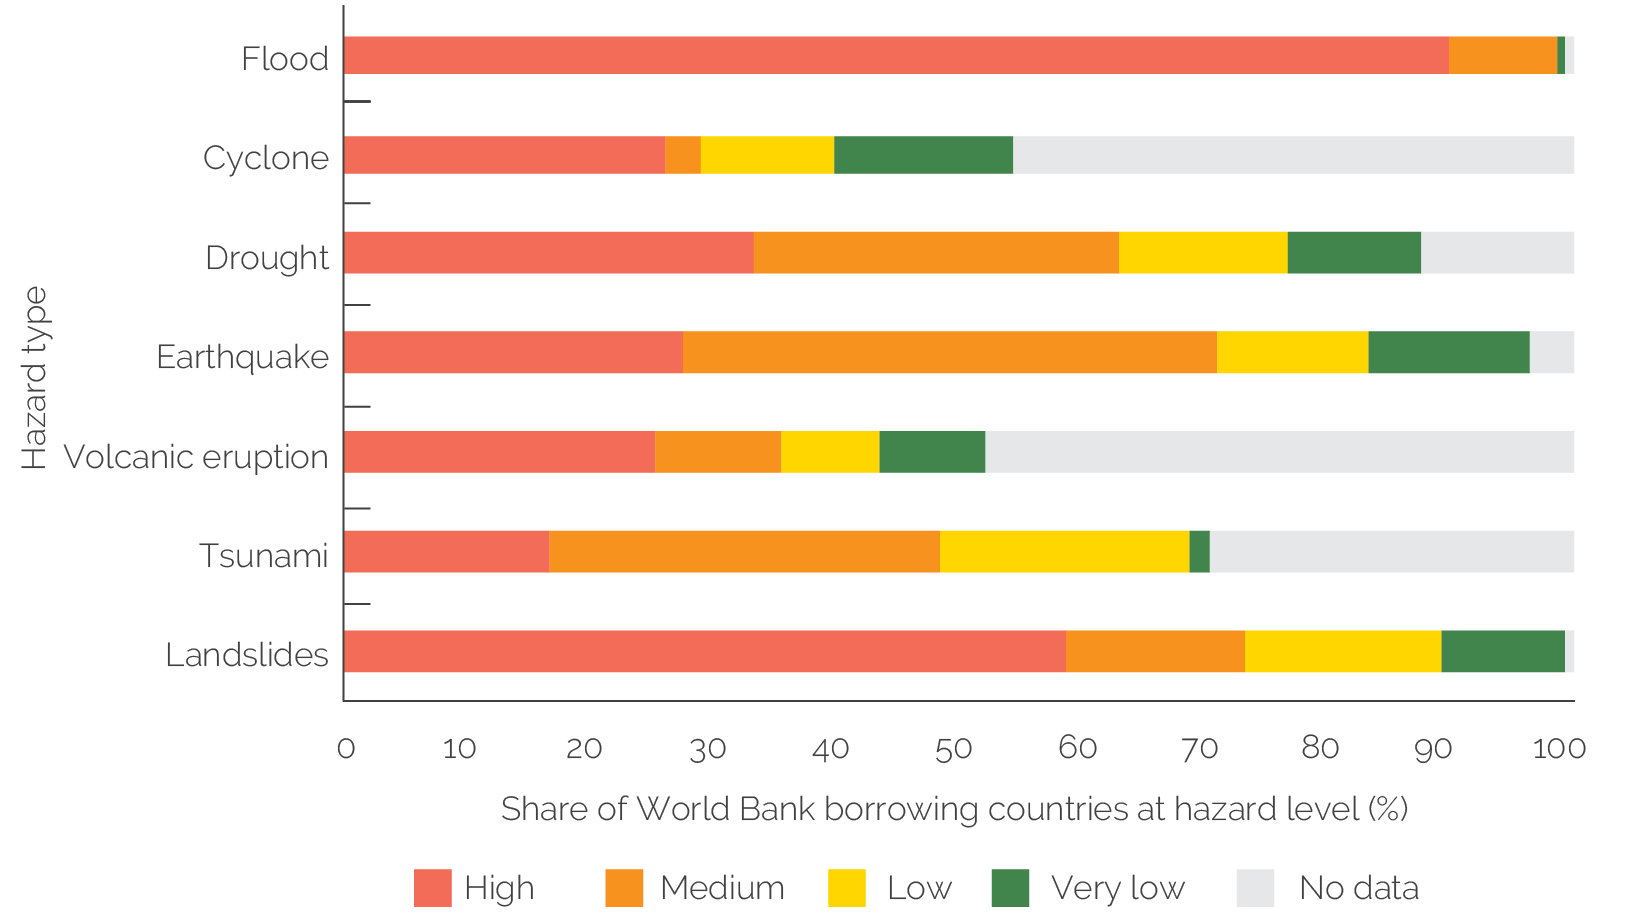 A horizontal bar graph shows that nearly all World Bank borrowing countries have high flood hazard level, over half have high landslide hazard level, and high hazard levels are less common for other hazards.